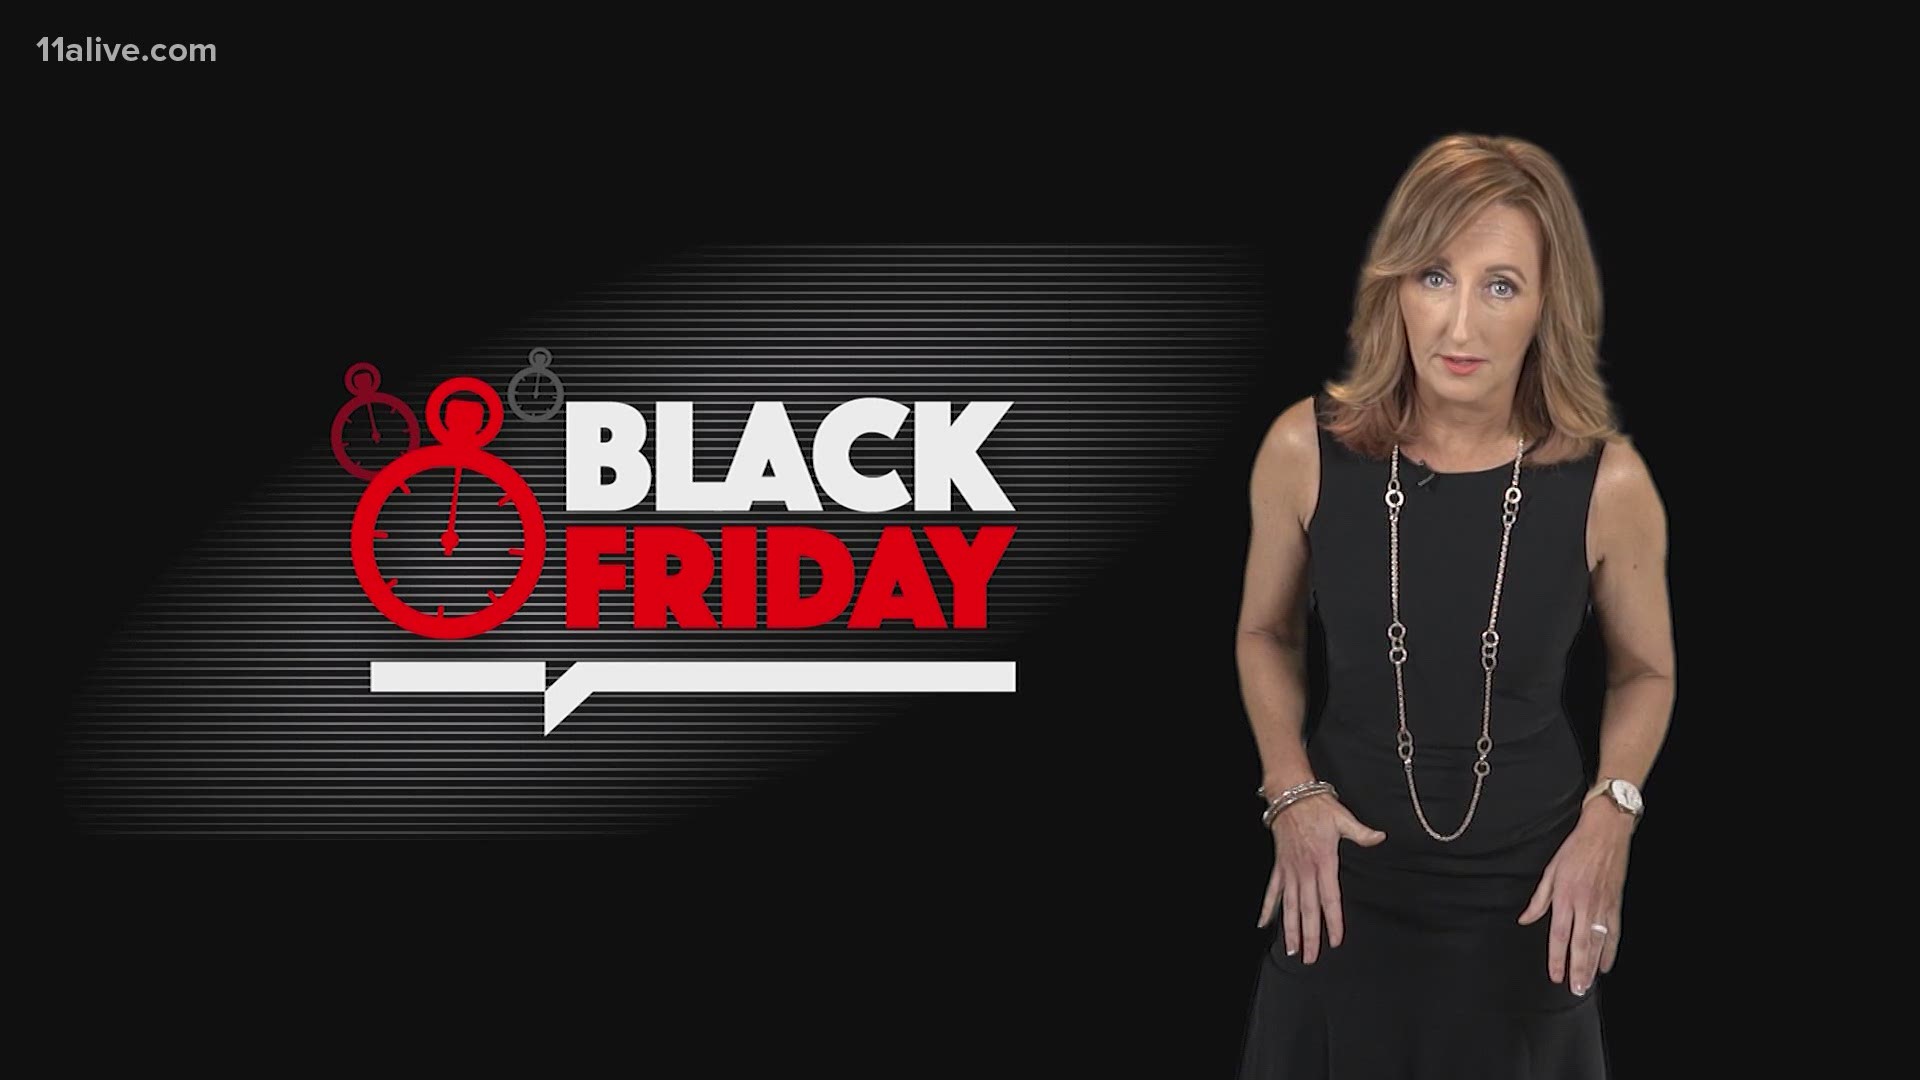 Here are some Black Friday shopping pro tips.